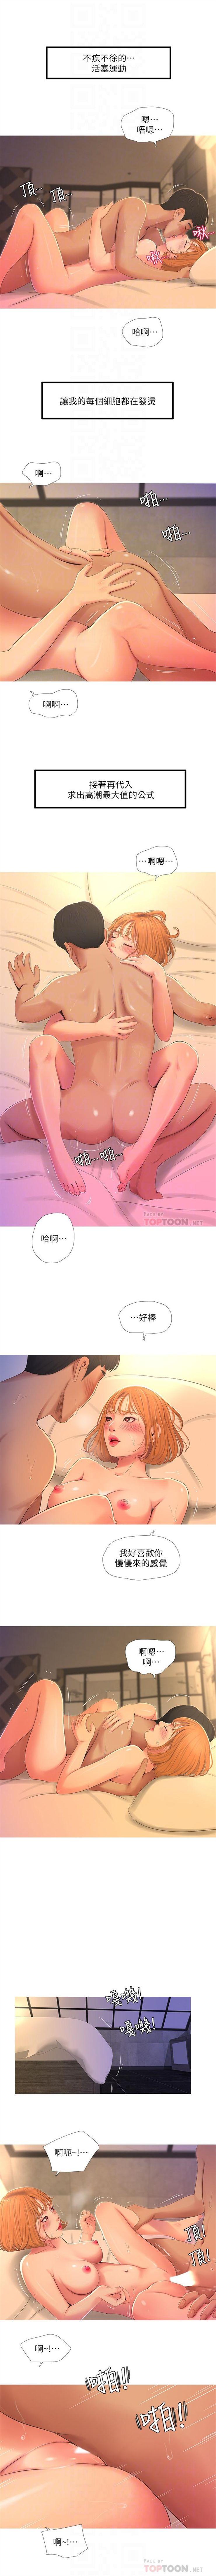 Bribe 親家四姊妹 1-100 官方中文（連載中） Old Vs Young - Page 11